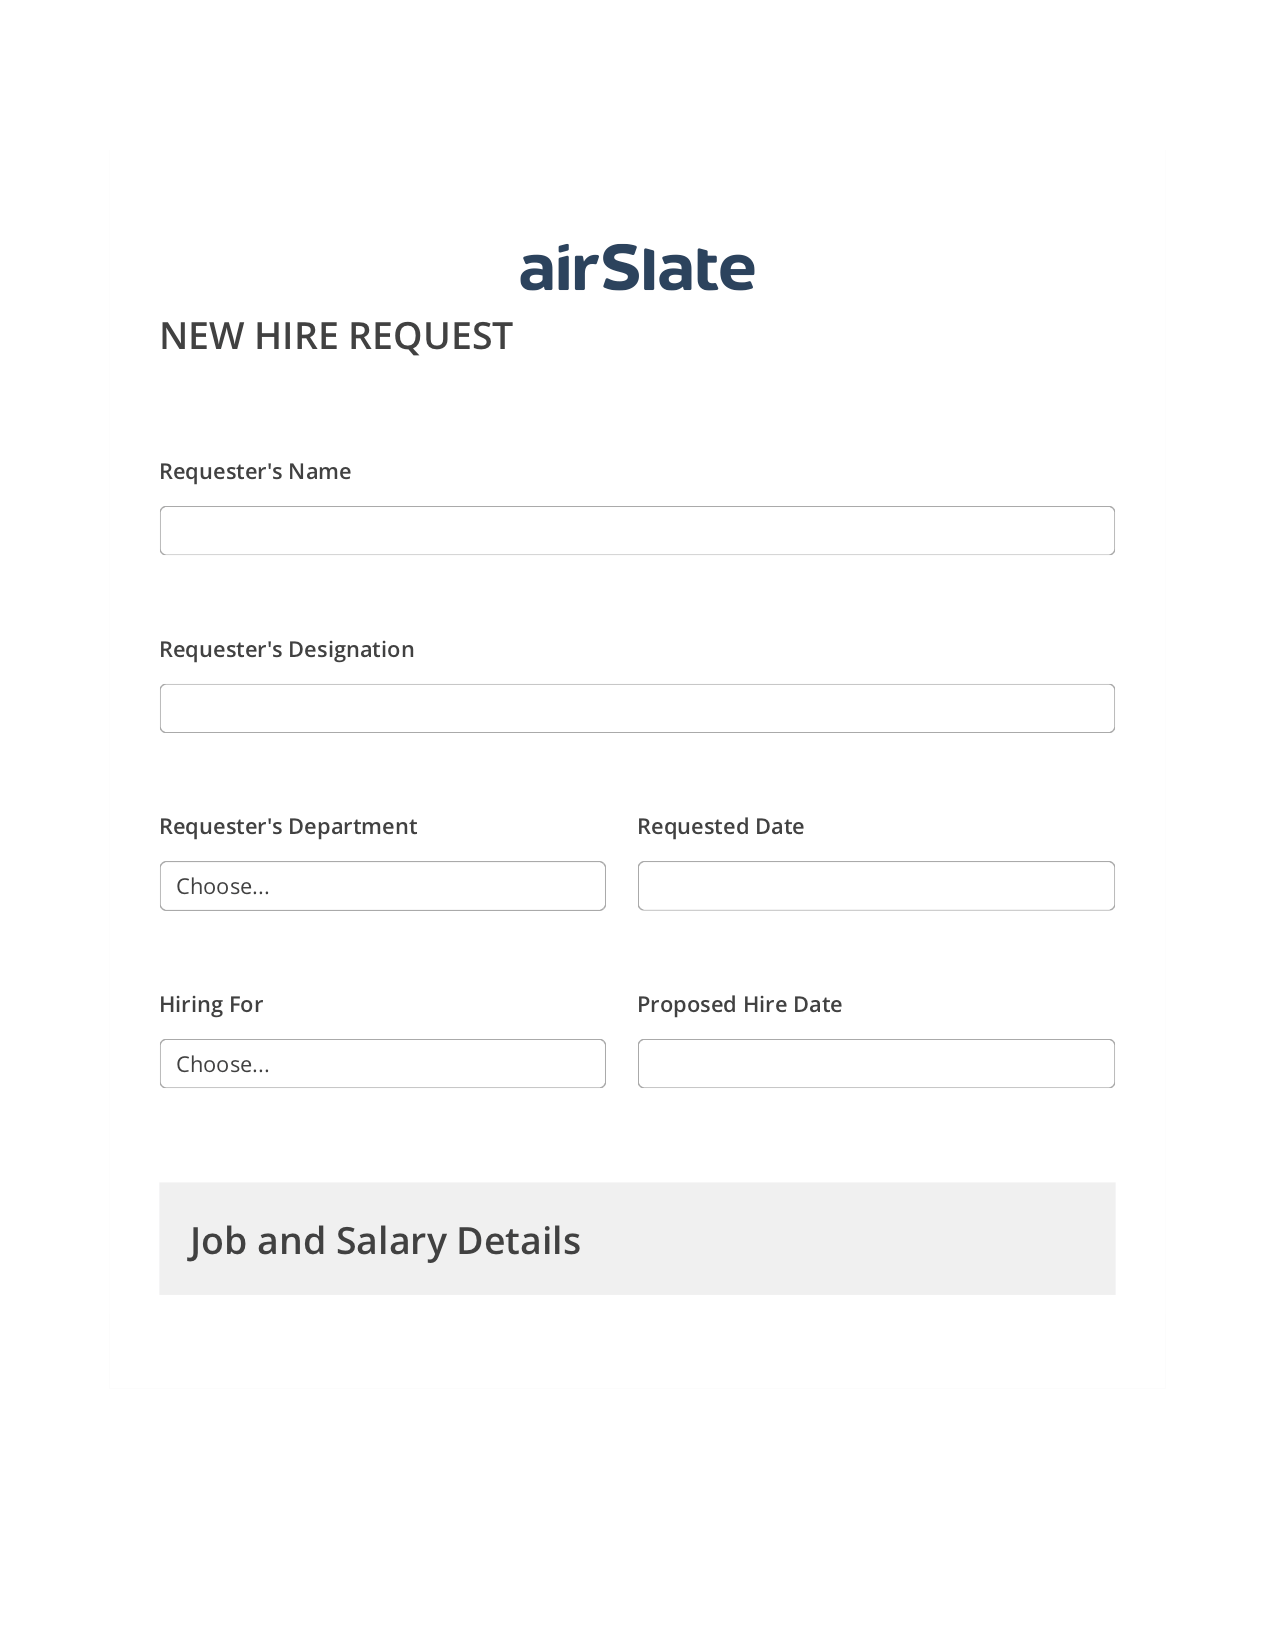 Hiring Request Workflow Pre-fill from CSV File Bot, Jira Bot, Export to NetSuite Bot